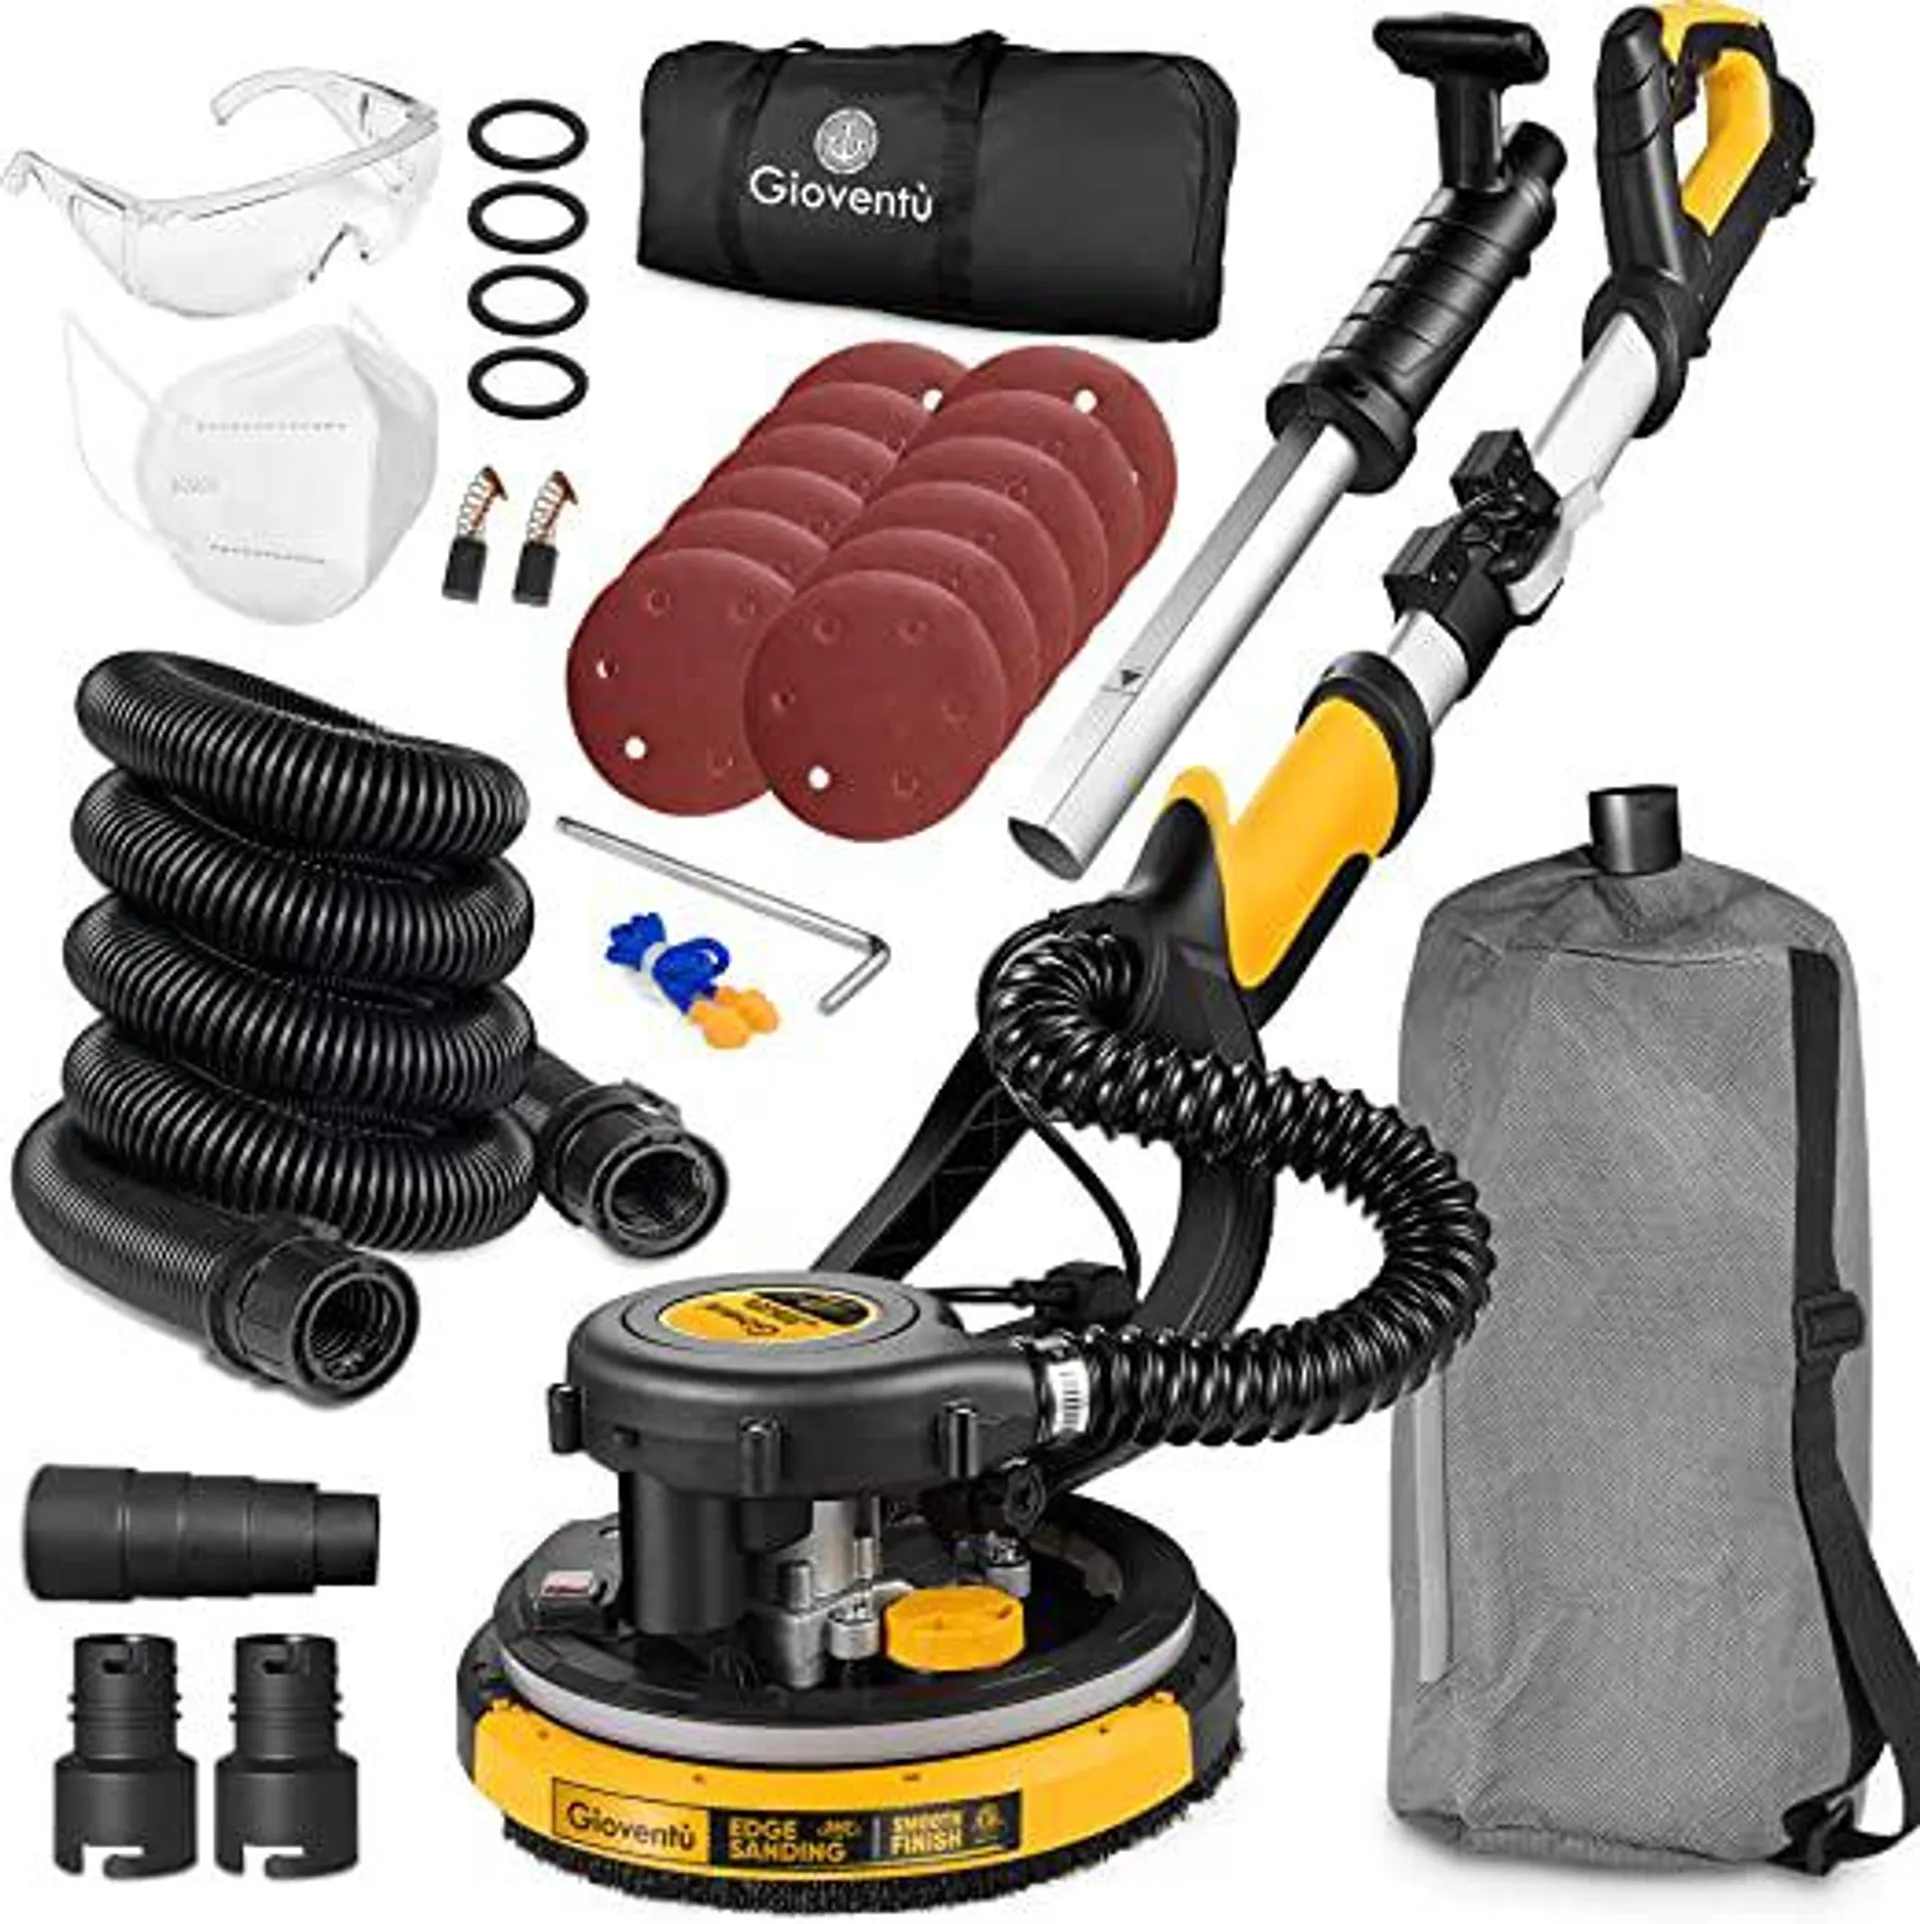 Drywall Sander, 6.5-amp Powerful Electric Drywall Sander with Vacuum, Auto Dust Absorption, 7 Variable Speed 900-1800RPM, Dustless Floor Sander with 26’ Power Cord for Popcorn Ceiling, Wood Floor etc